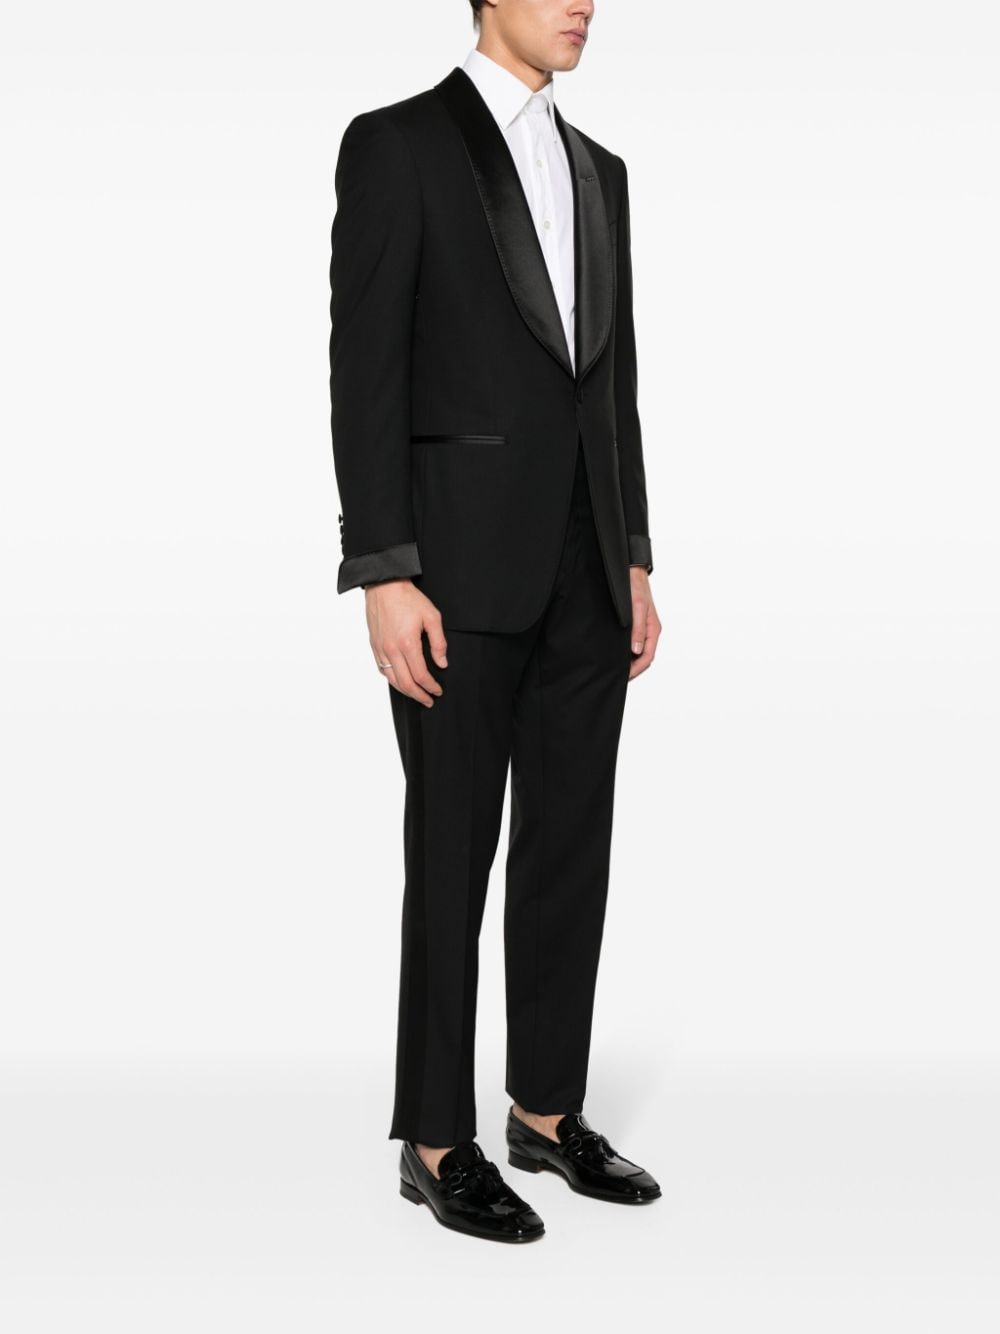 TOM FORD single-breasted Dinner Suit - Farfetch